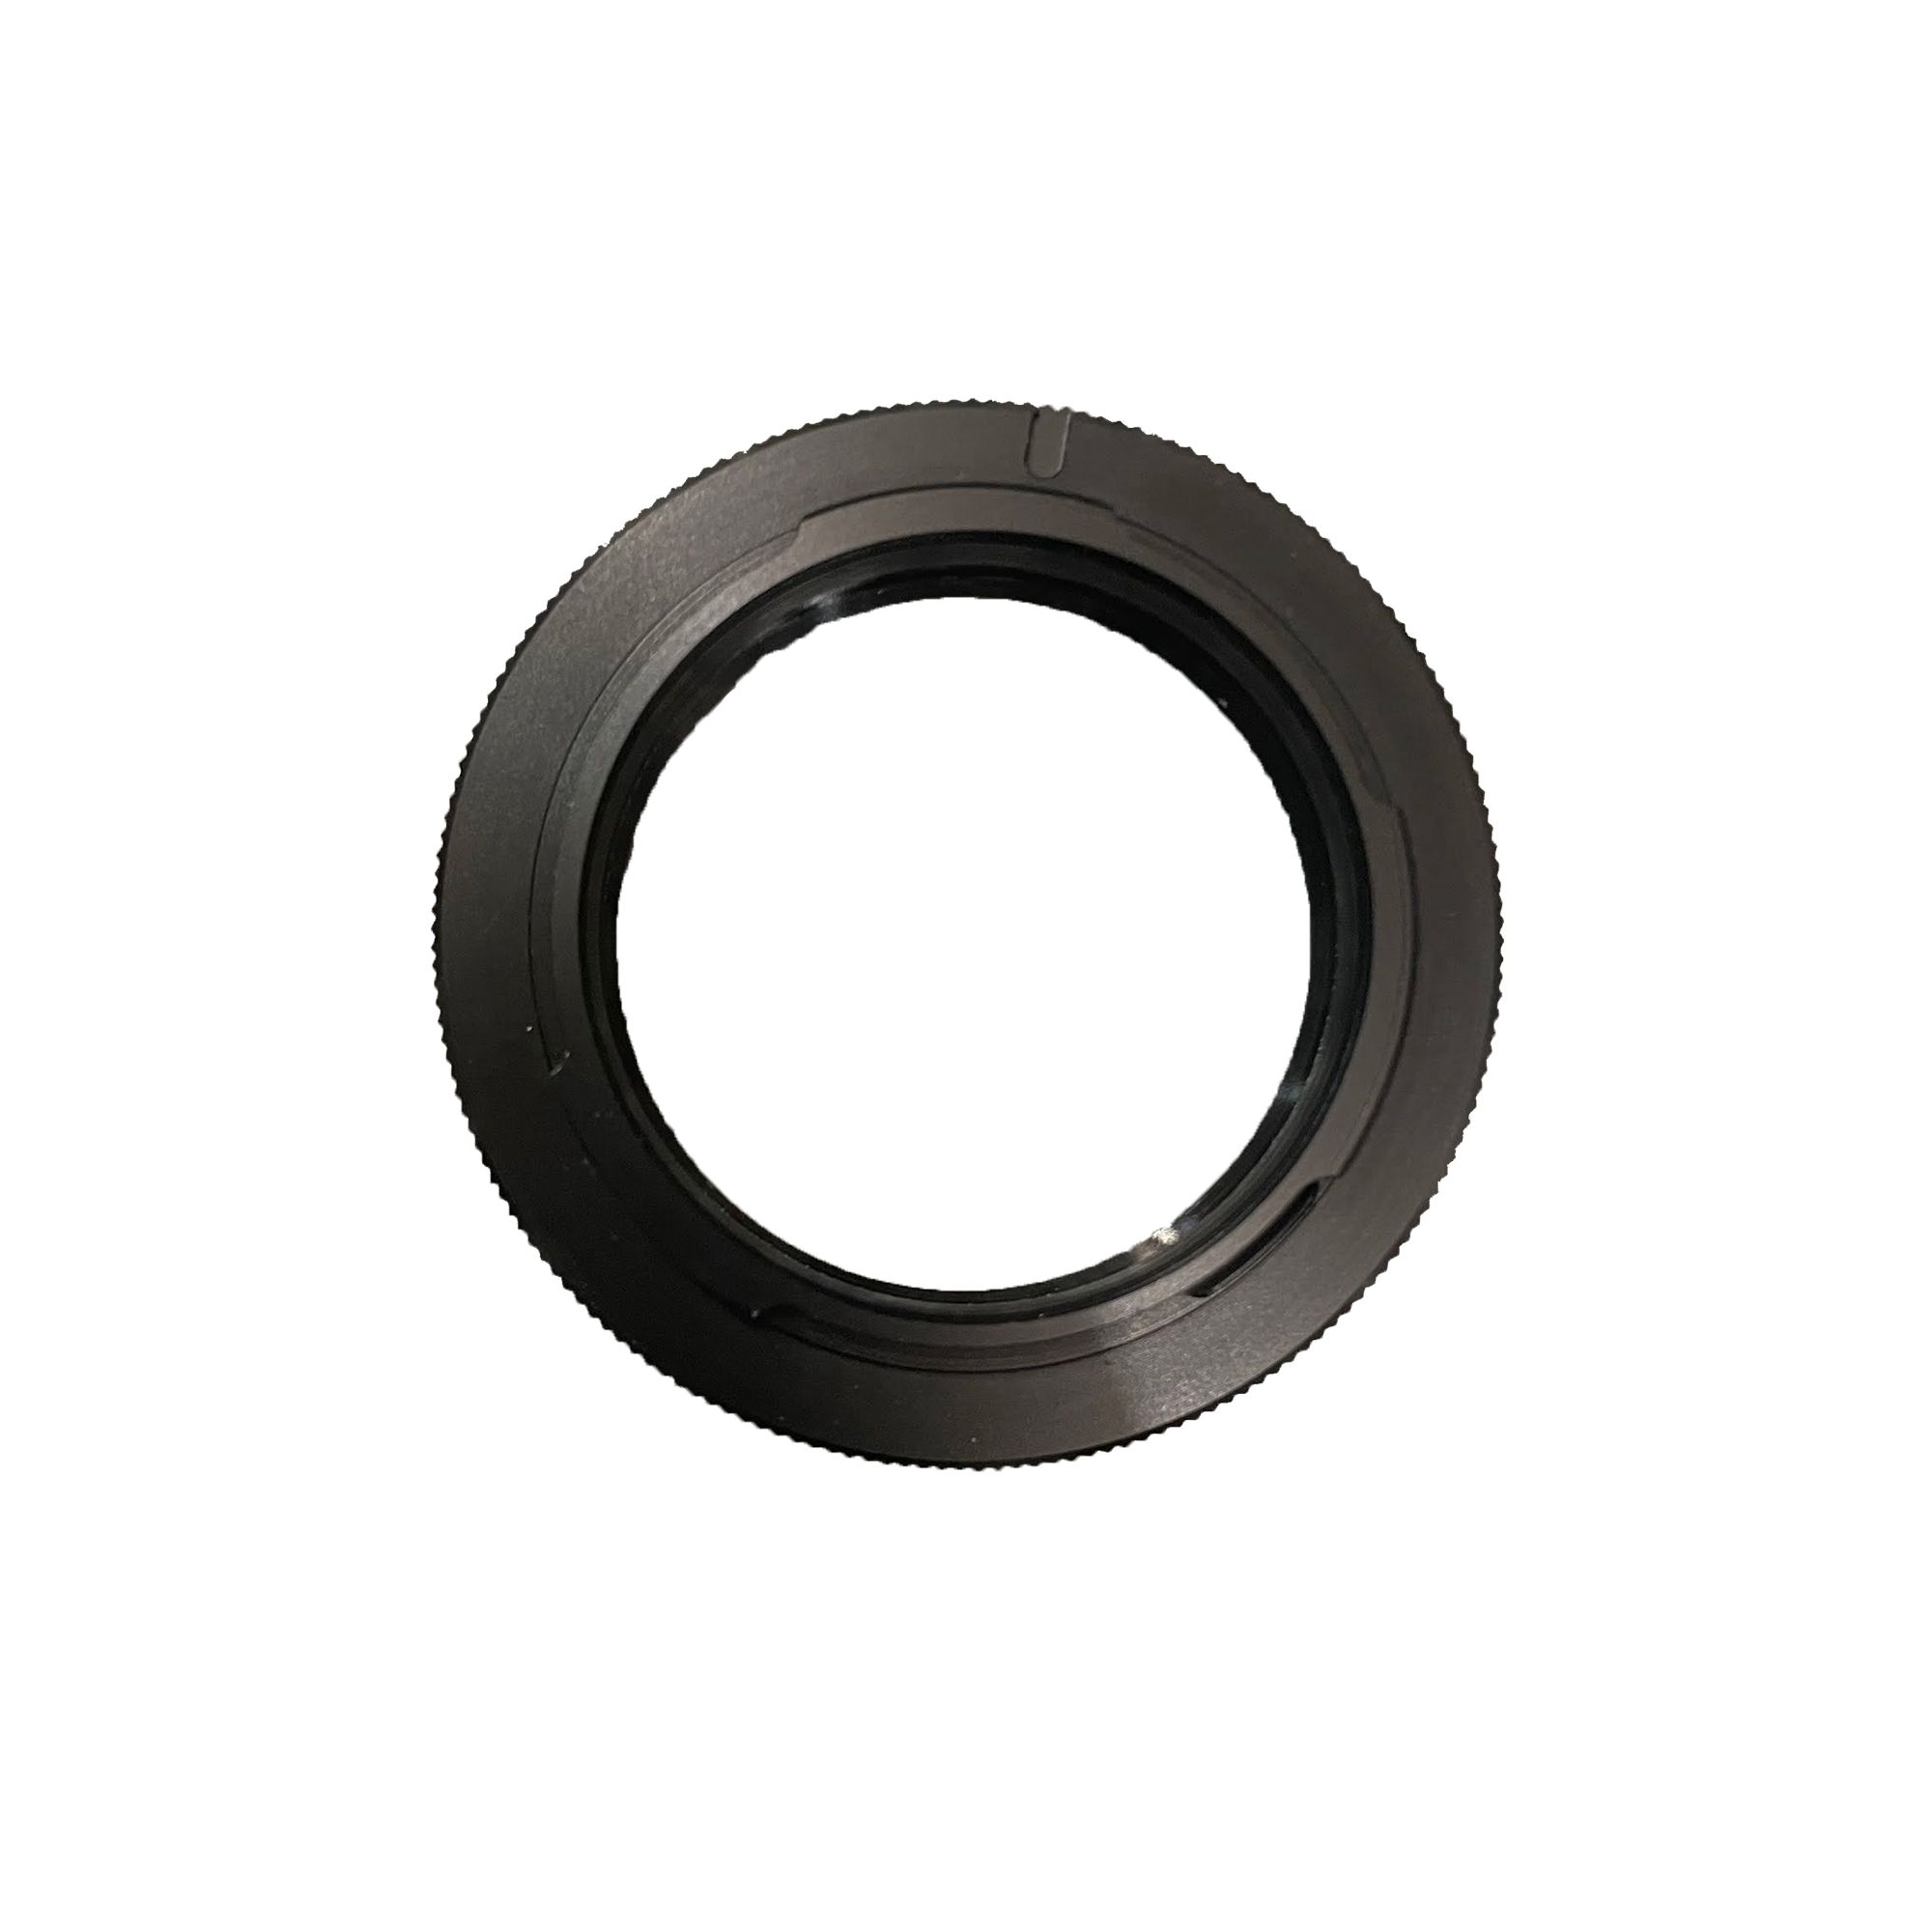 Pentax K-Mount Camera to T-Mount Adapter Ring for Spotting Scopes